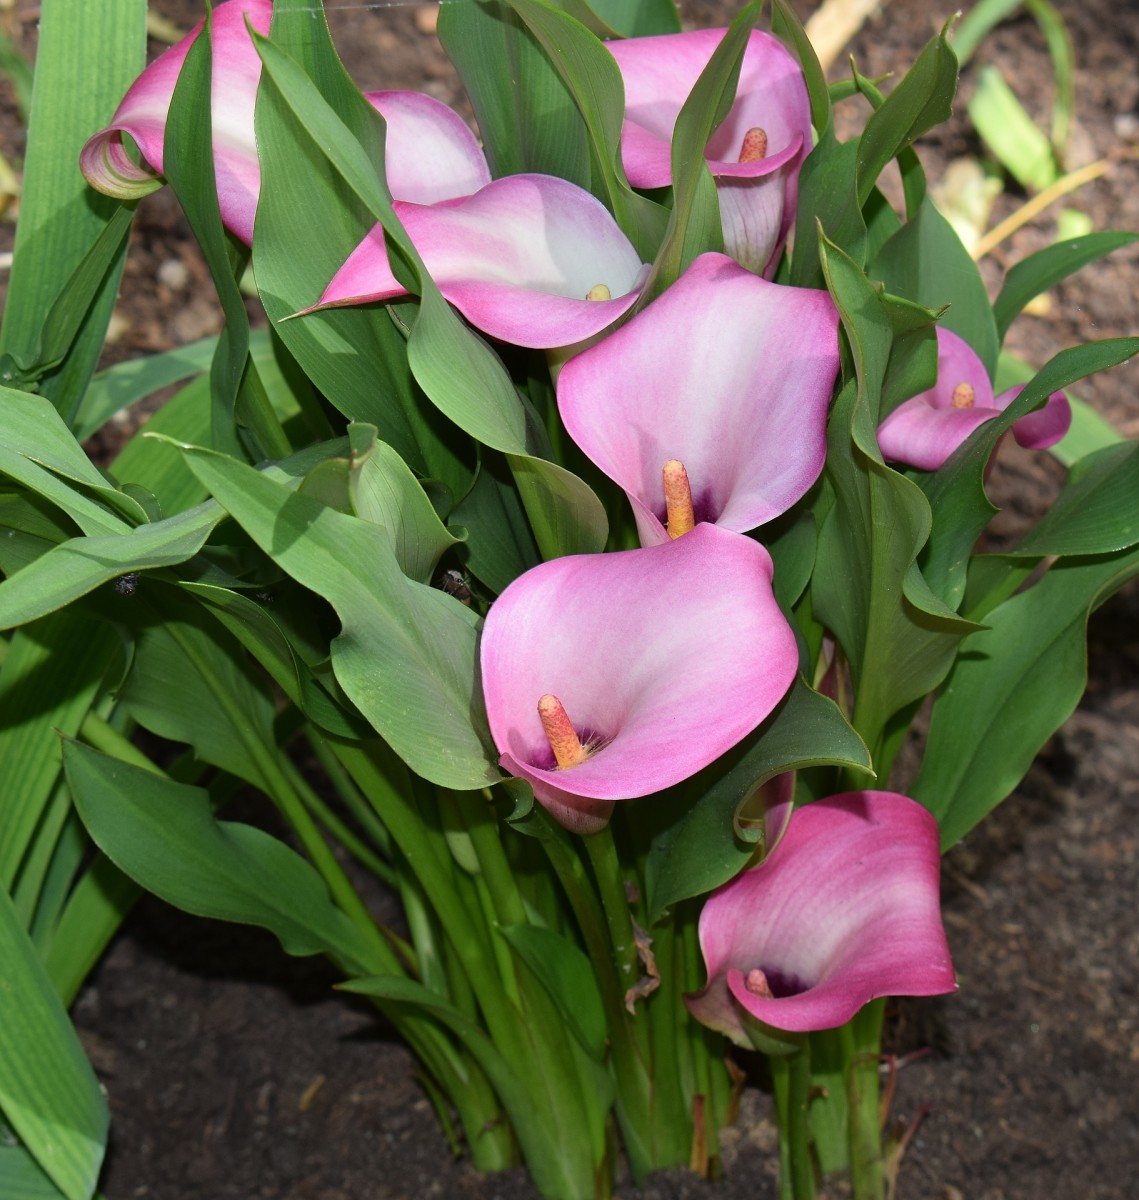 Though typically white, calla lilies come in an assortment of colors.